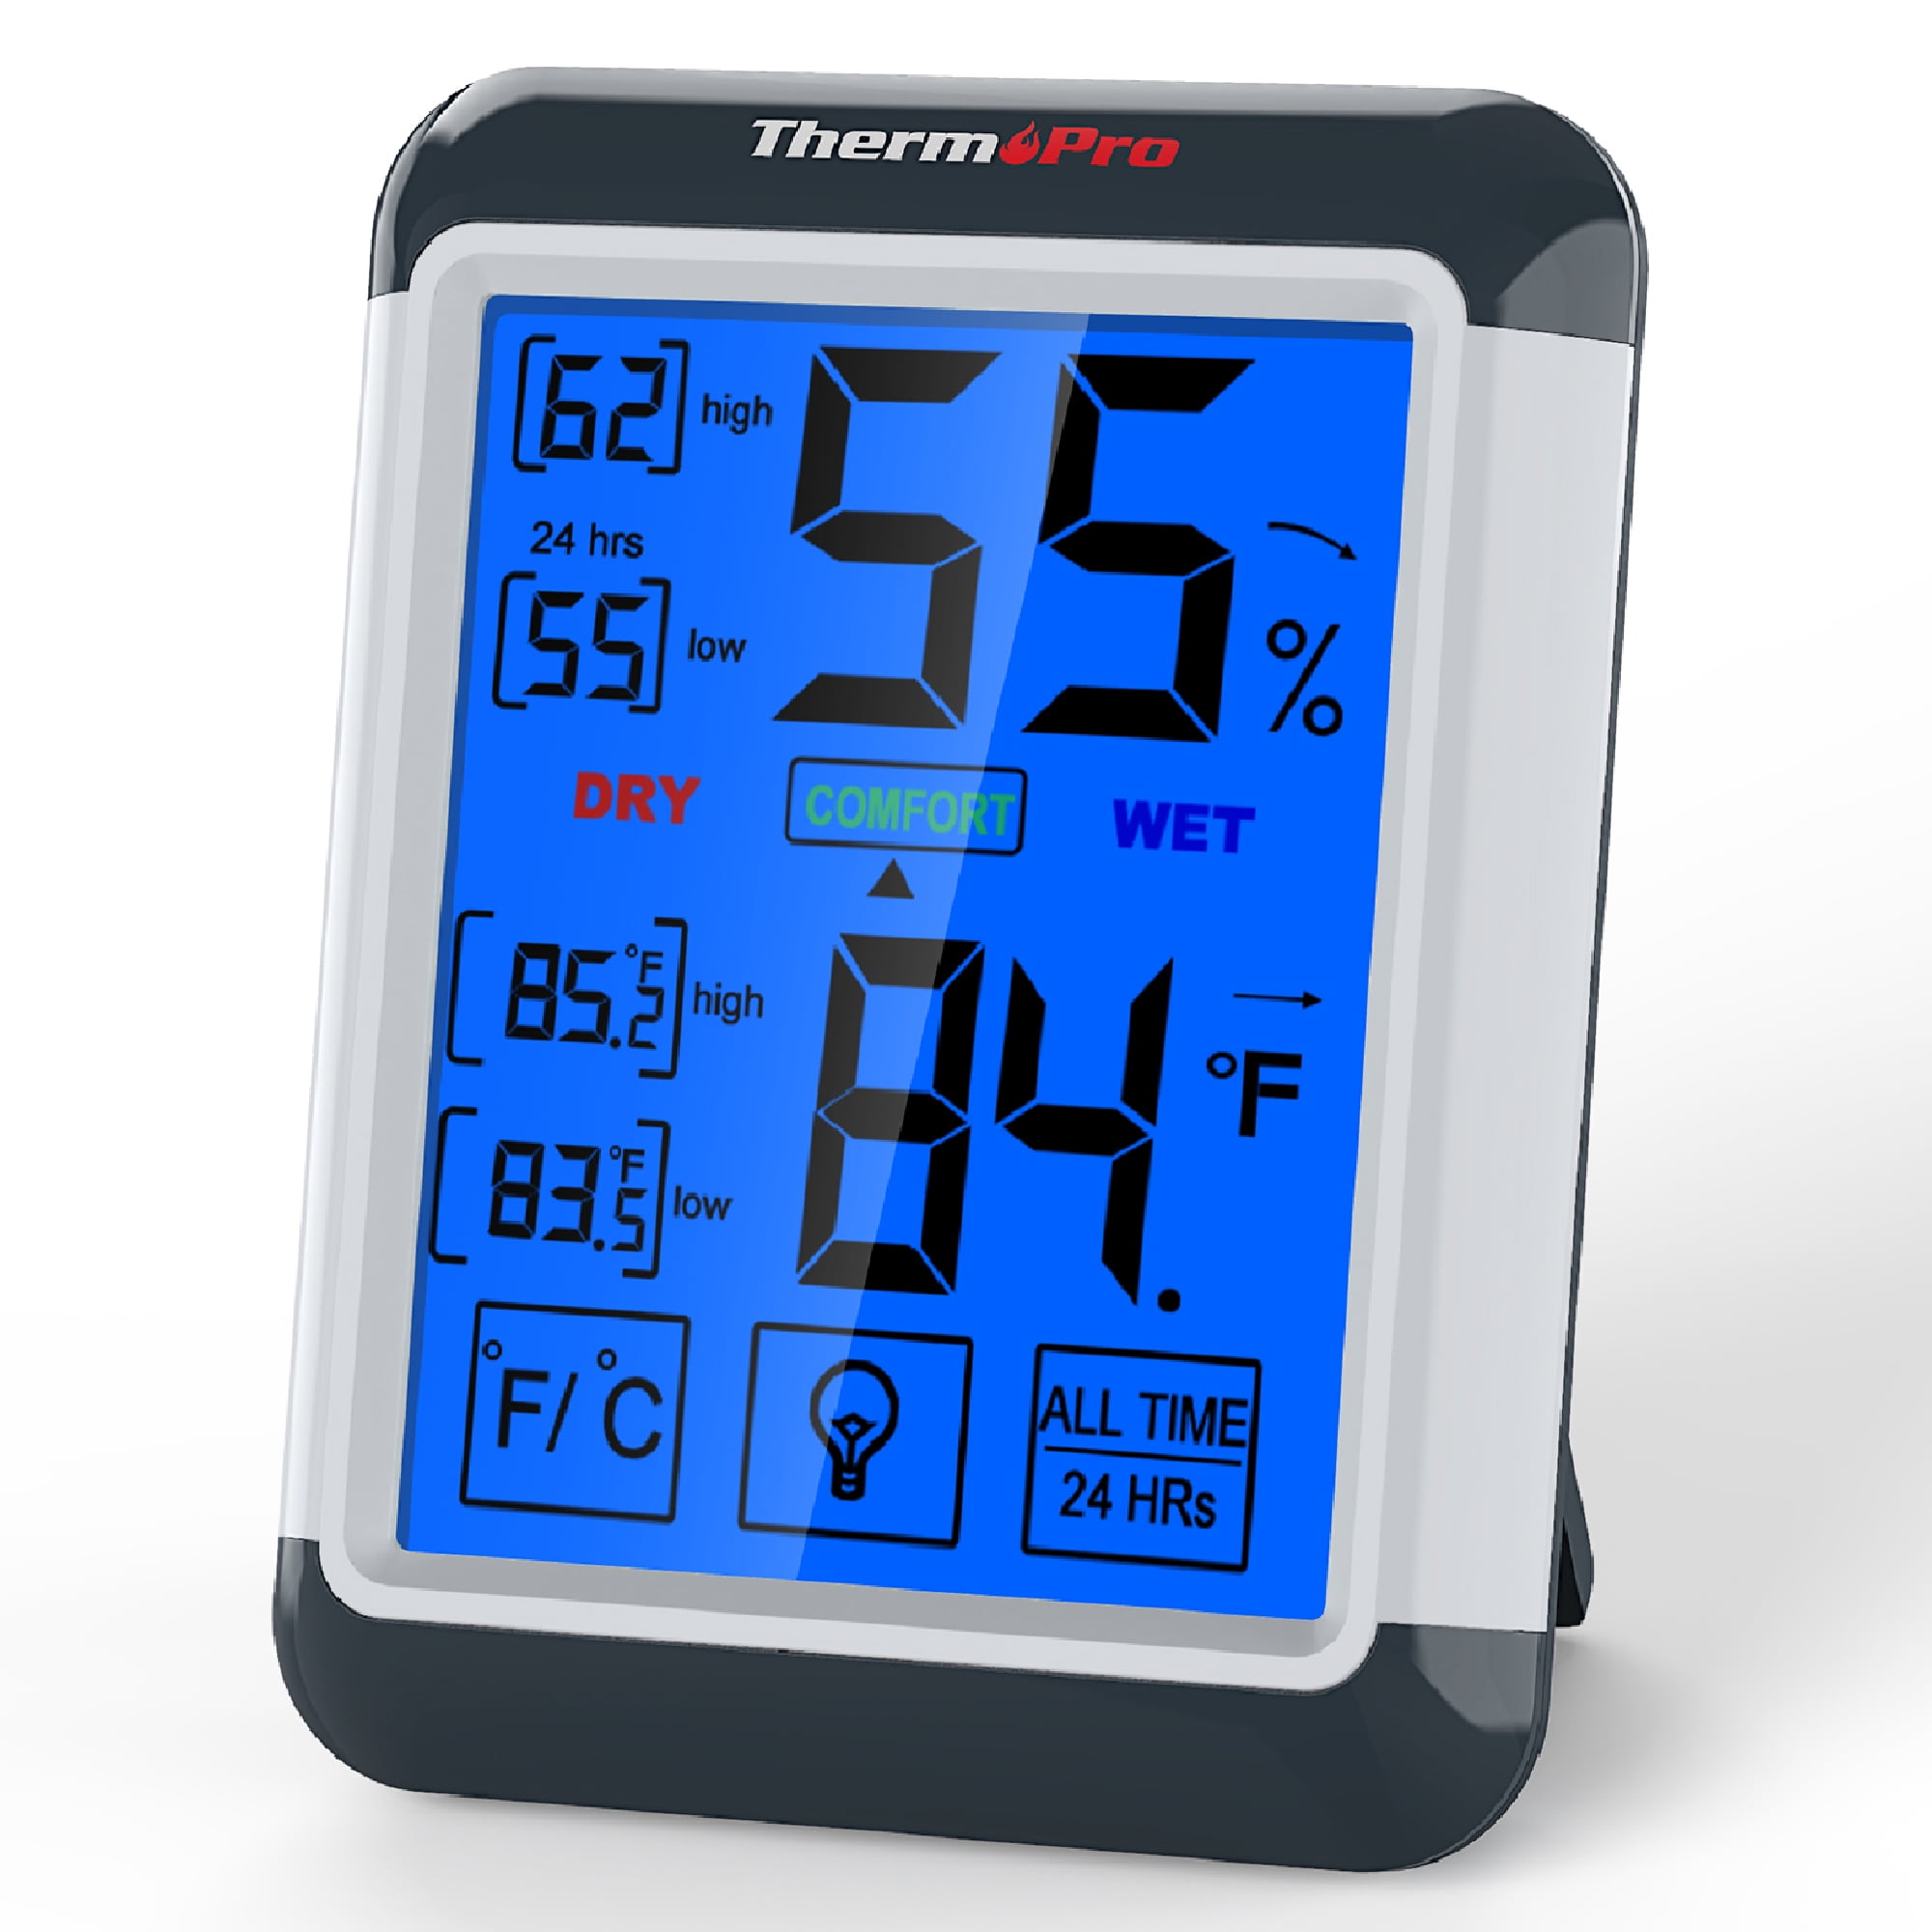 ThermoPro TP52 Digital Hygrometer Indoor Thermometer Temperature and  Humidity Gauge Monitor Indicator Room Thermometer with Backlight LCD  Display Humidity Meter